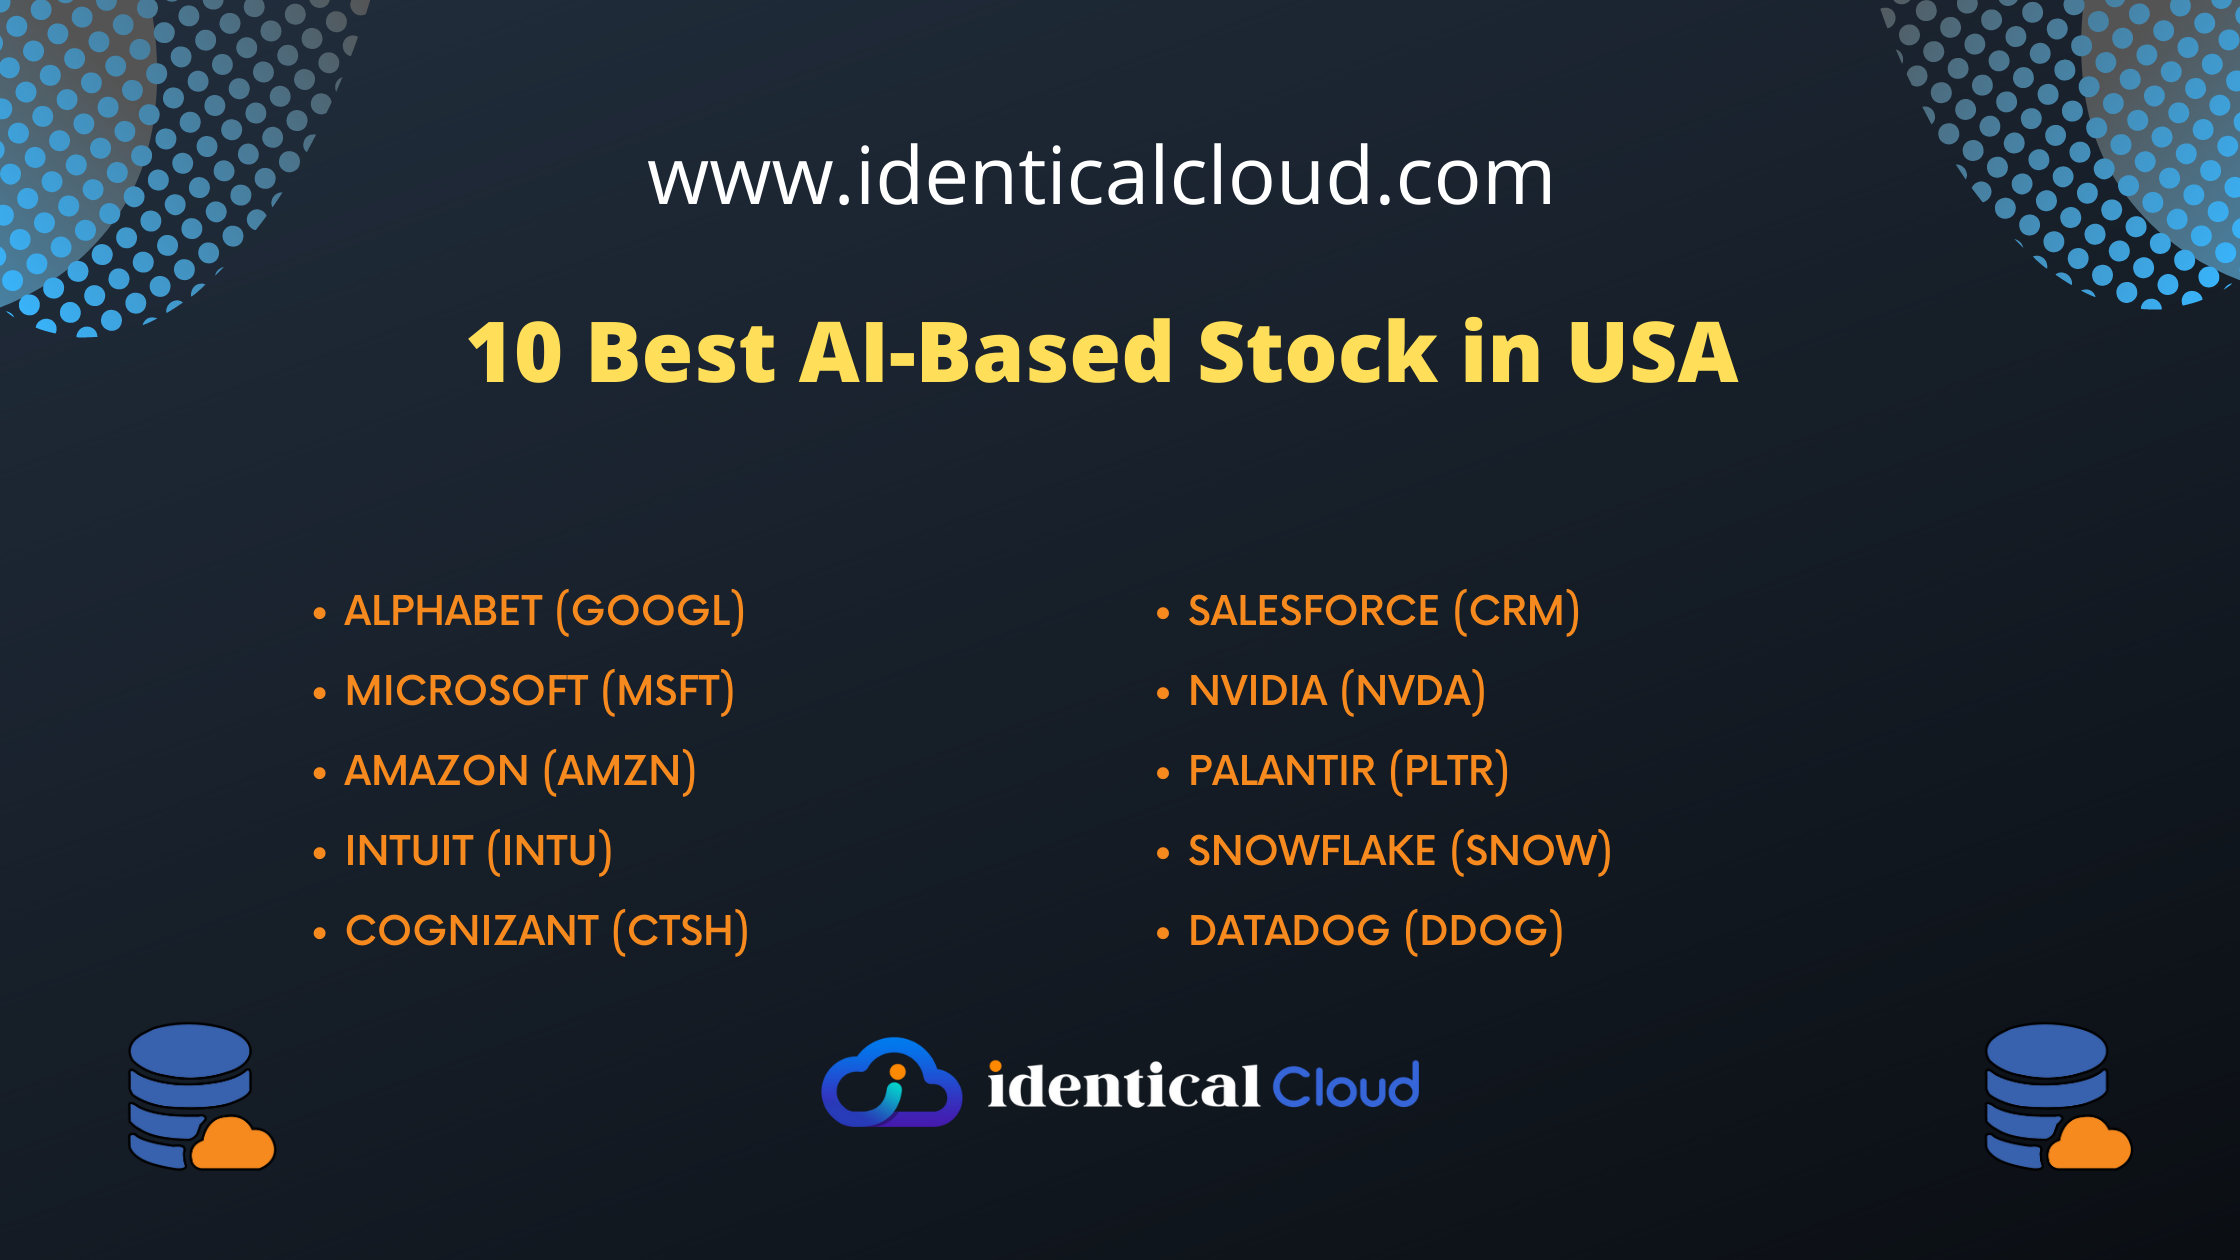 10 Best AI-Based Stock in USA - identicalcloud.com